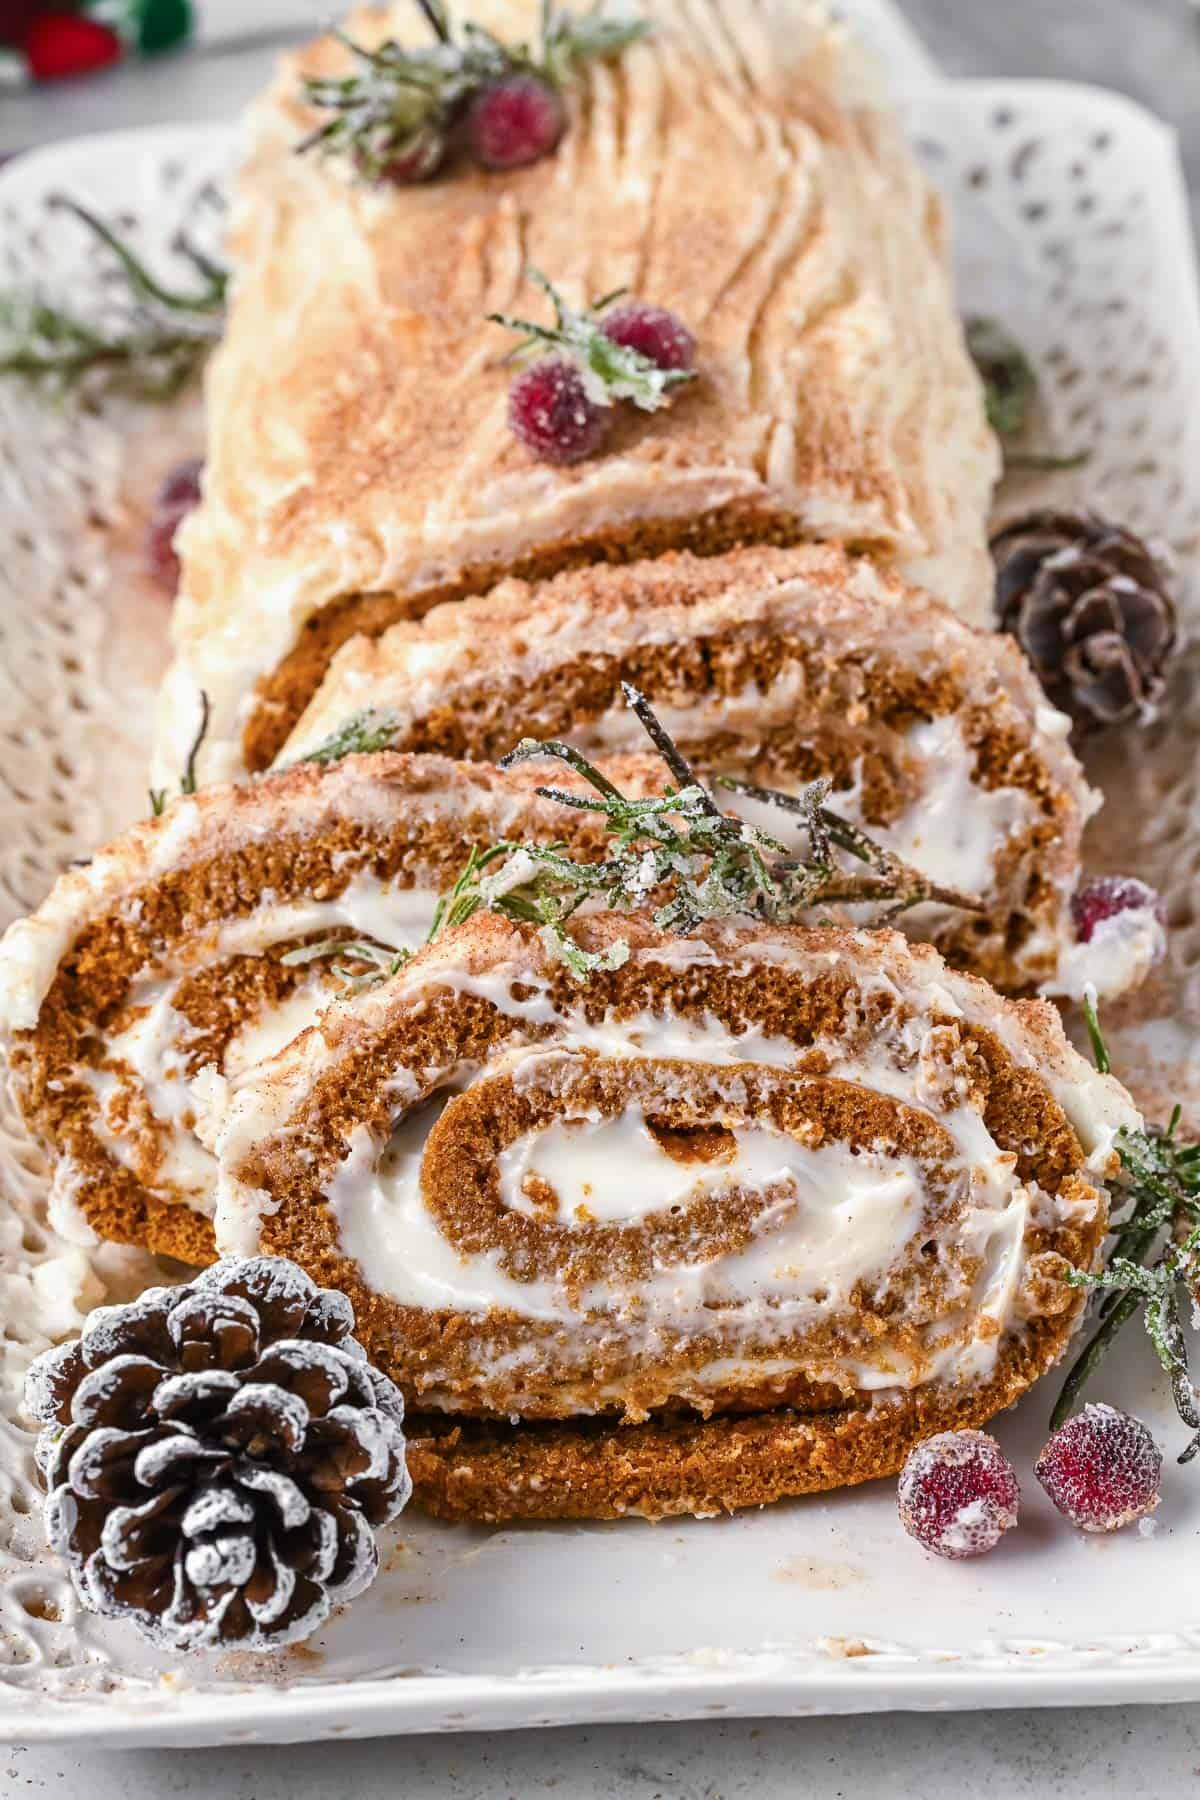 Slices of a gingerbread yule log slanted against the uncut cake with pine cones, sugared cranberries and rosemary for decor.